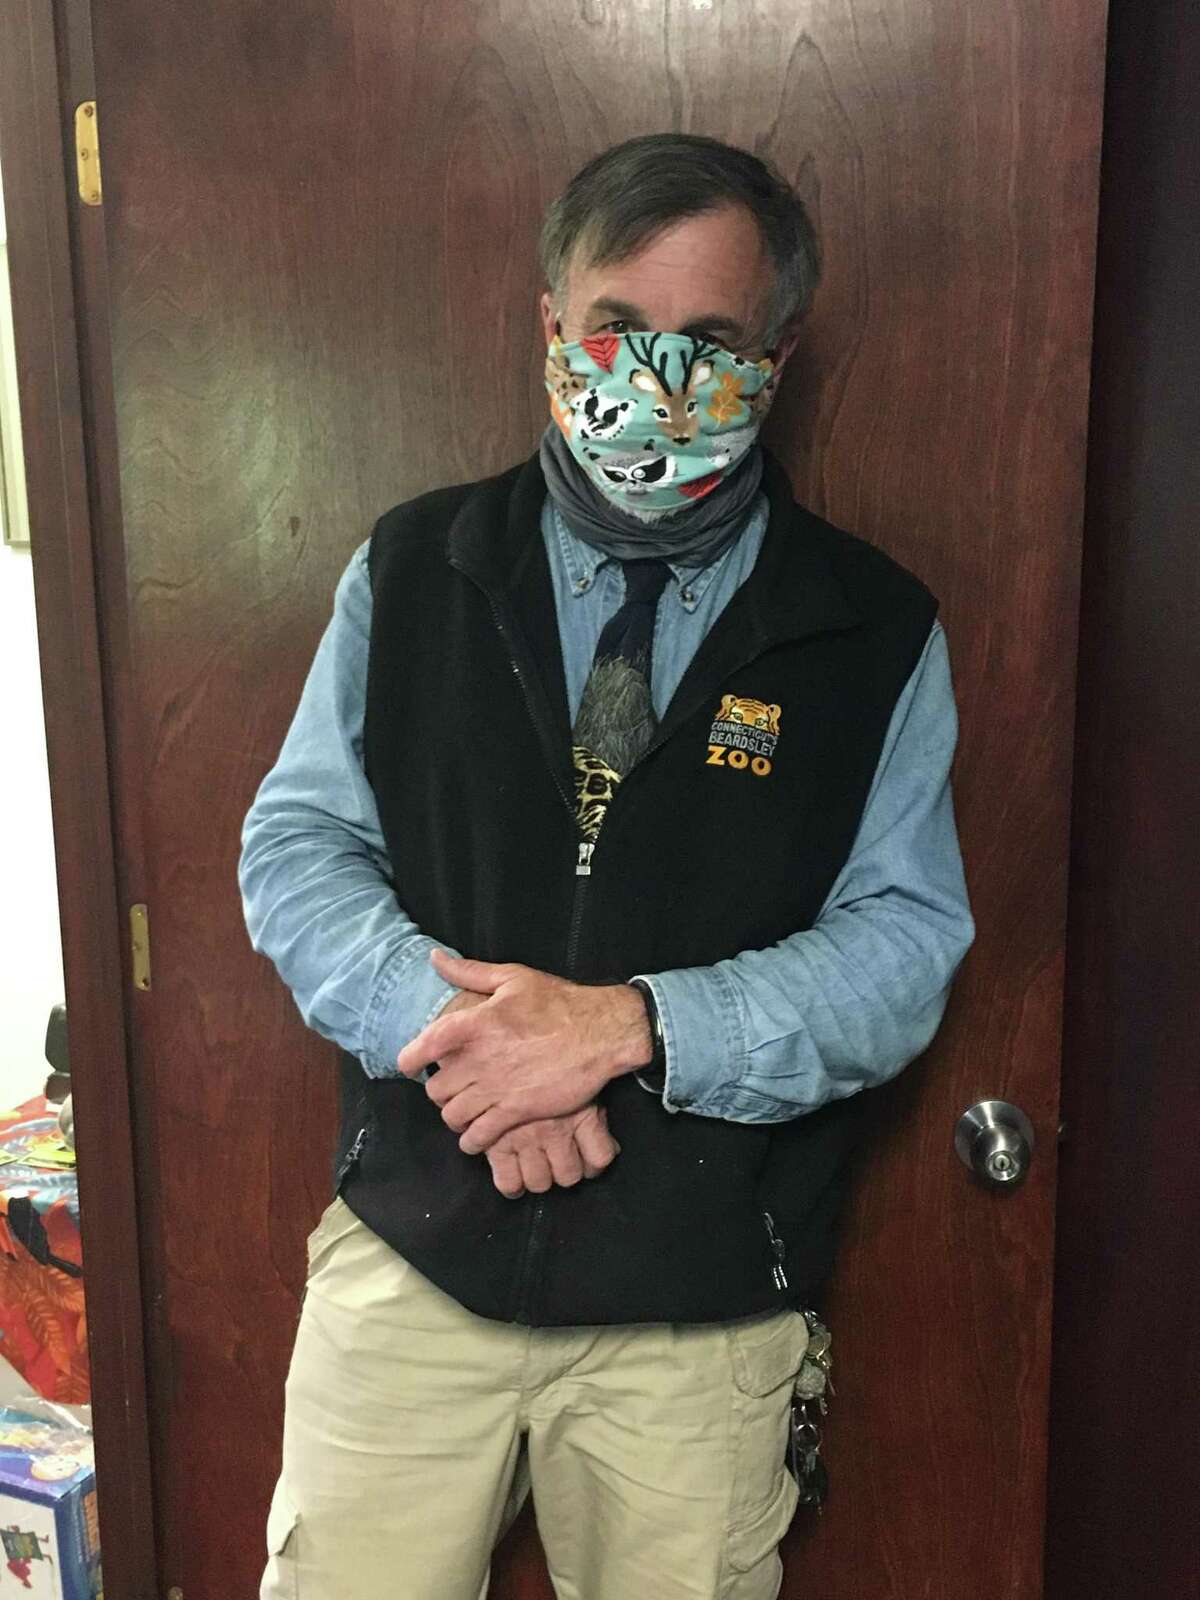 Connecticut’s Beardsley Zoo in Bridgeport will reopen June 1, with a number of new safety measures in place. Pictured is Zoo Director Gregg Dancho.